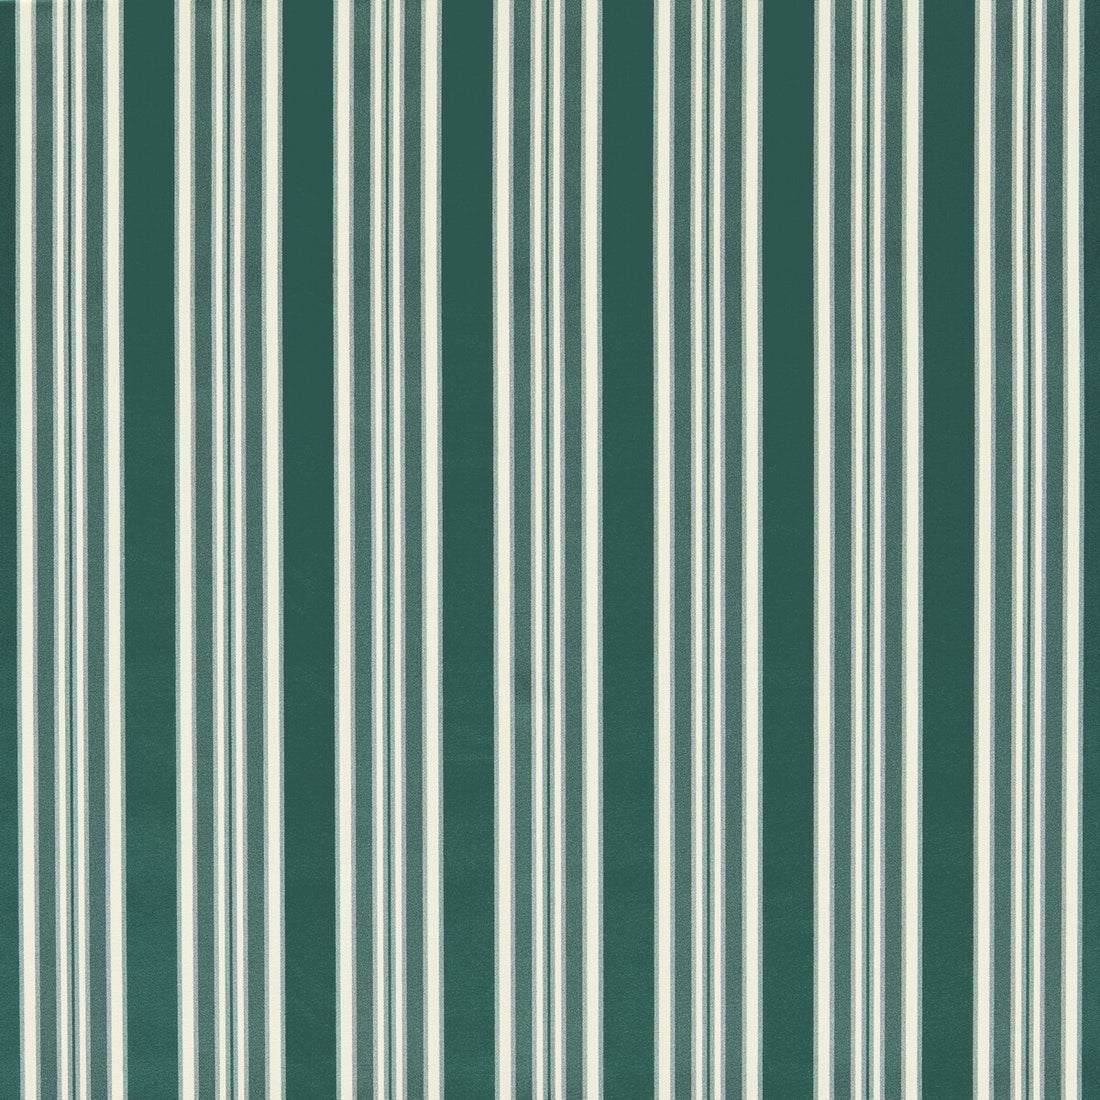 Wilmott fabric in teal color - pattern F1691/07.CAC.0 - by Clarke And Clarke in the Whitworth collection